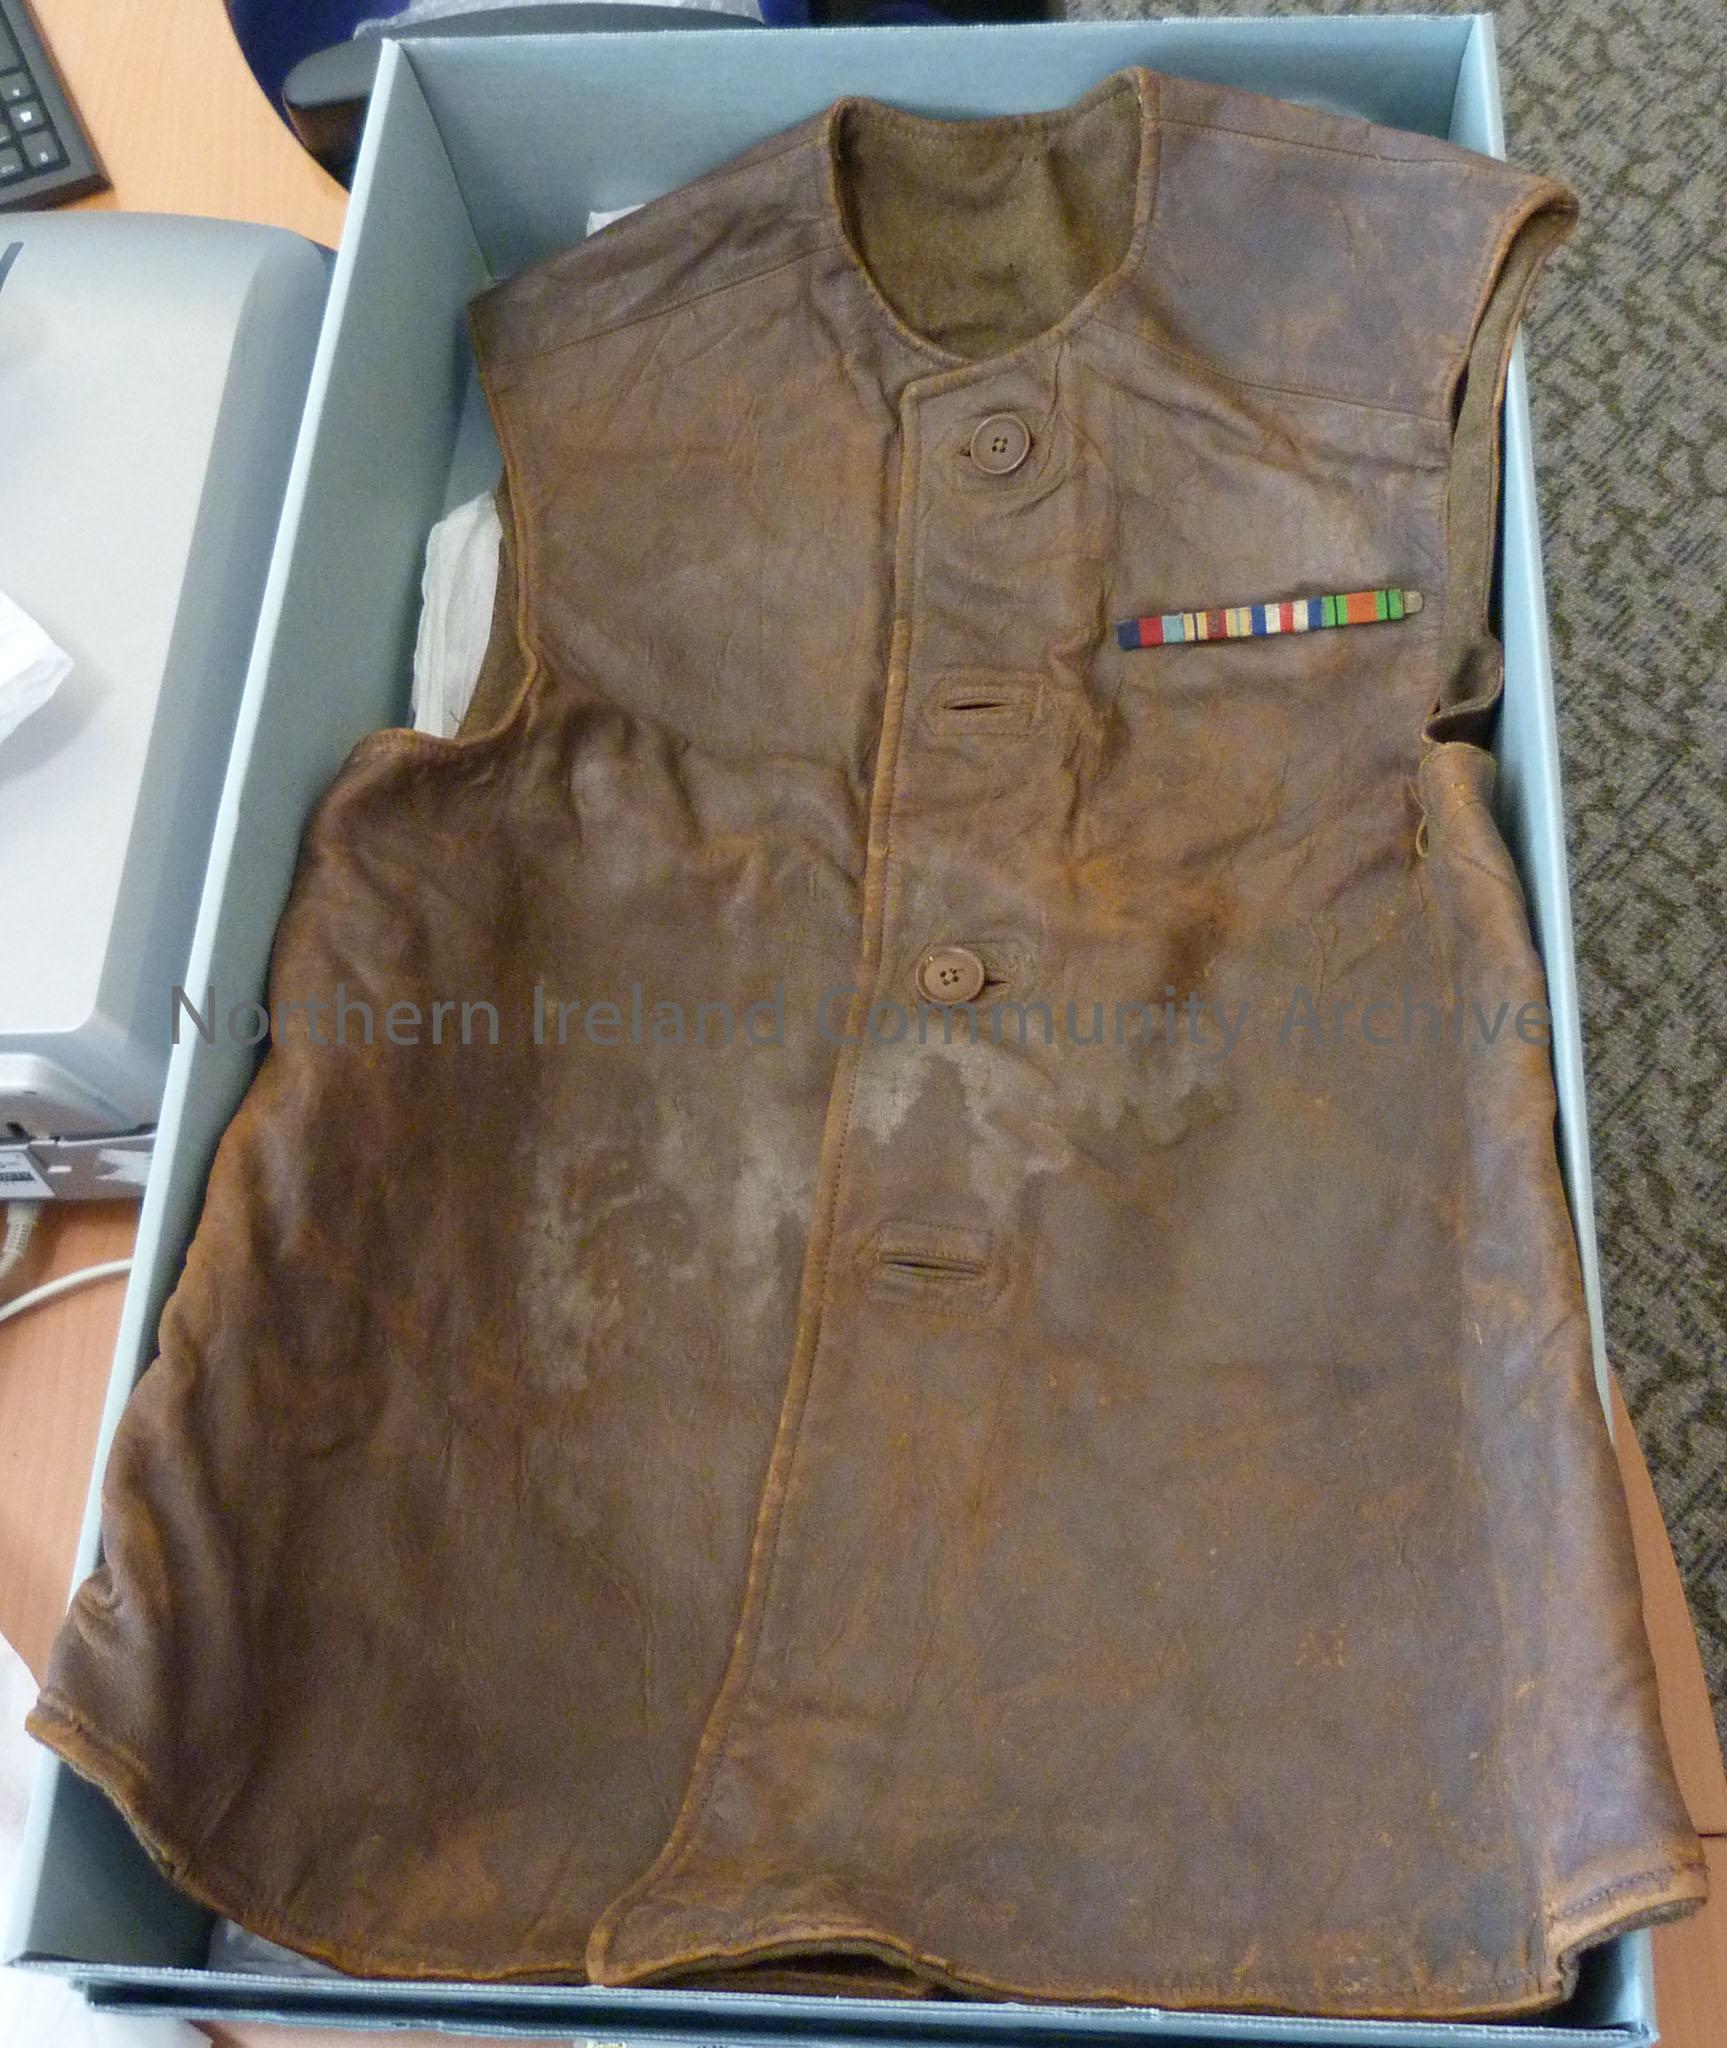 Brown leather sleeveless jacket with four buttons down the front and a multicoloured medal bar on left breast